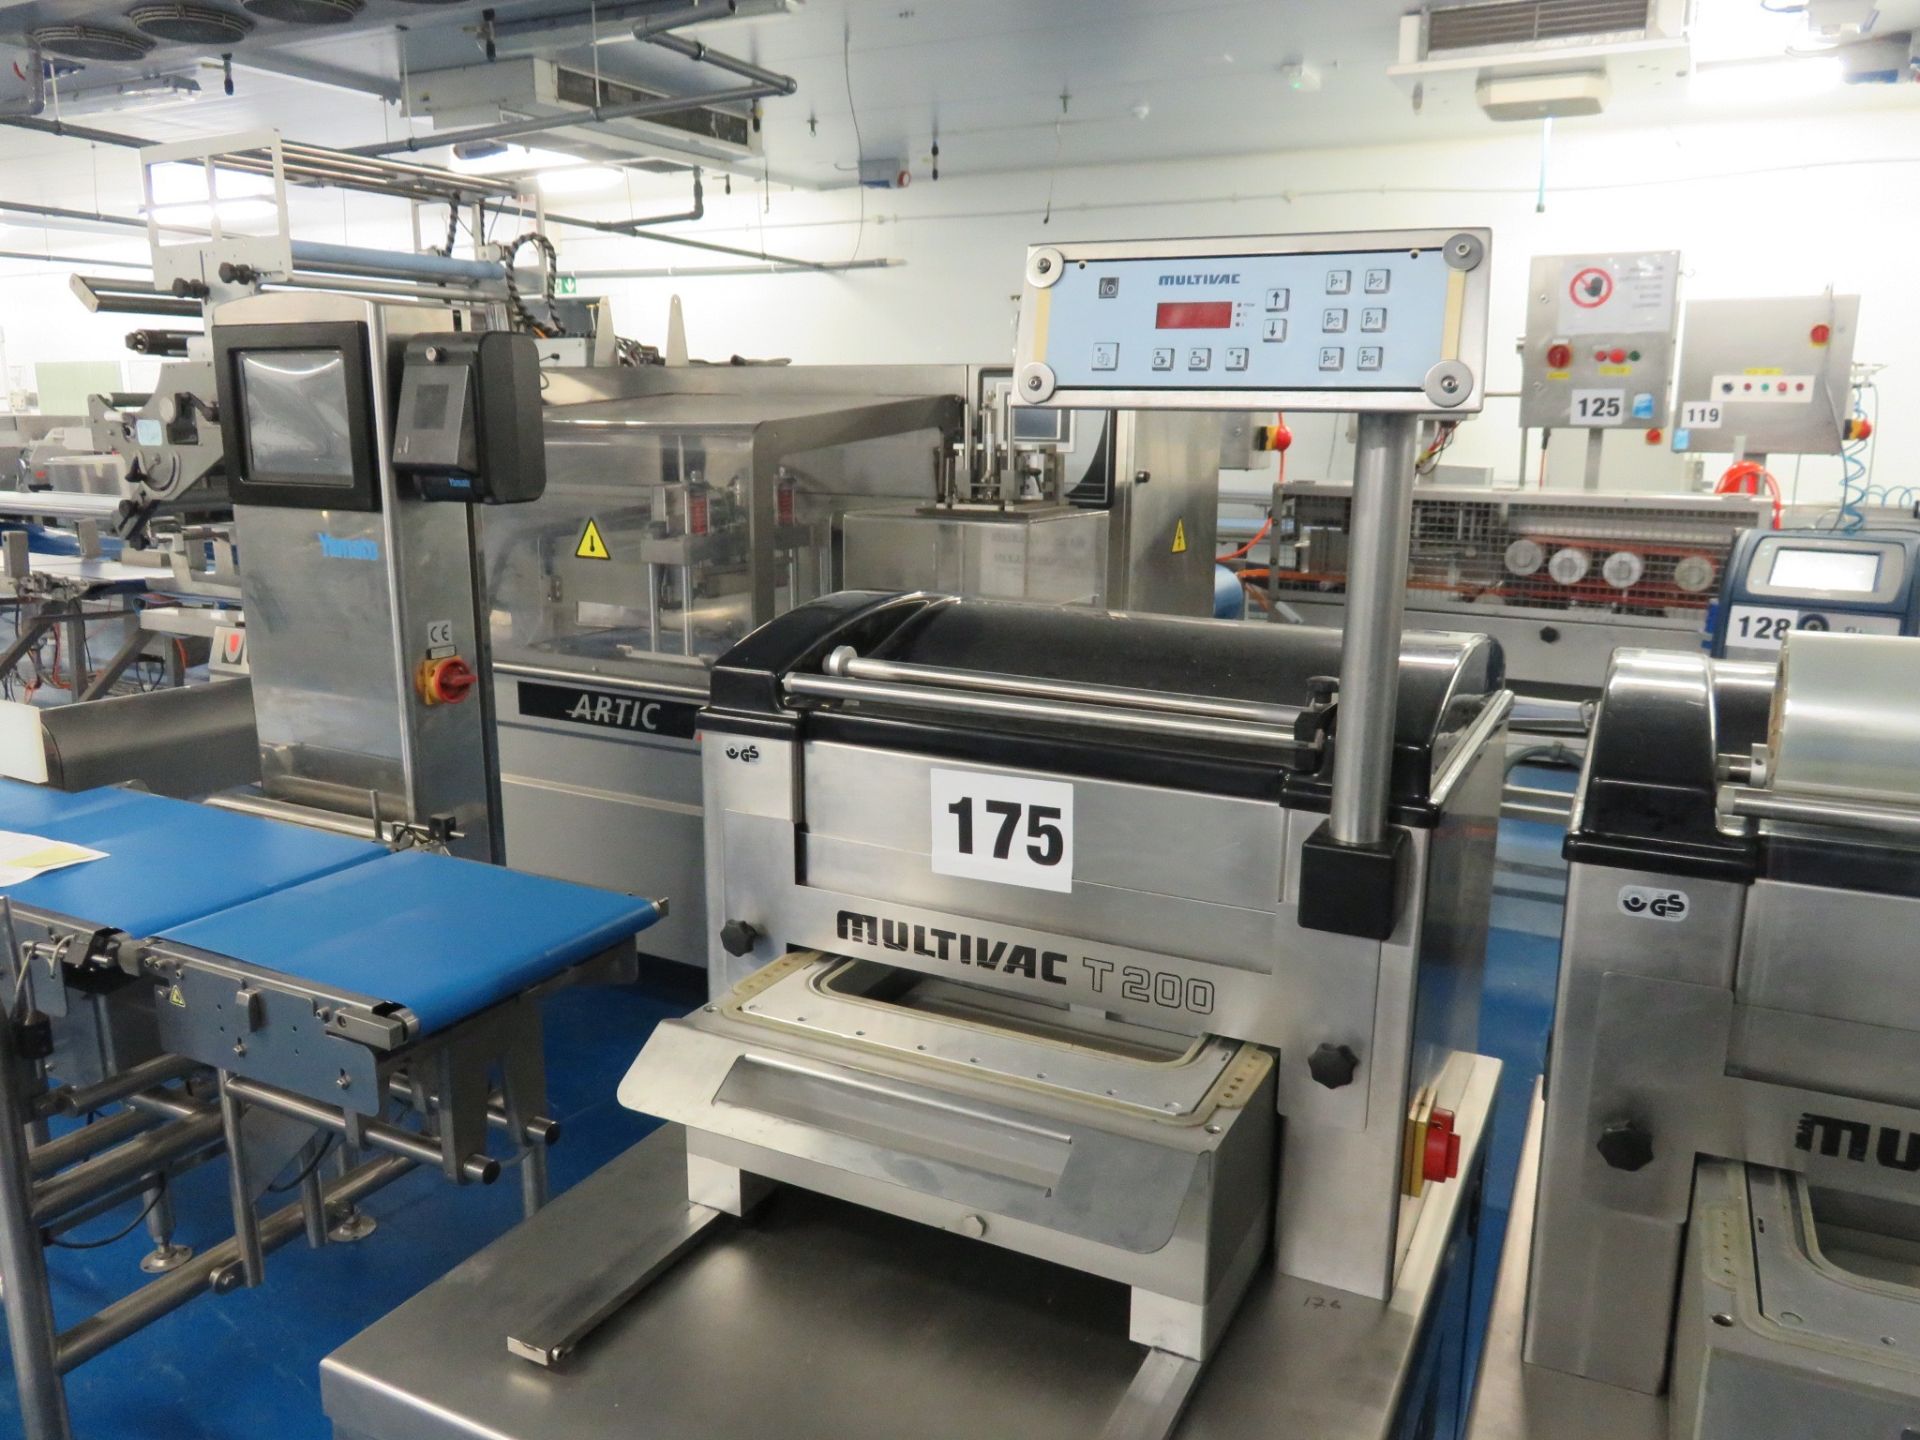 Multivac T200 Tray Sealing machine. Die size approx 345 x 190mm. LO £40 - Image 4 of 5